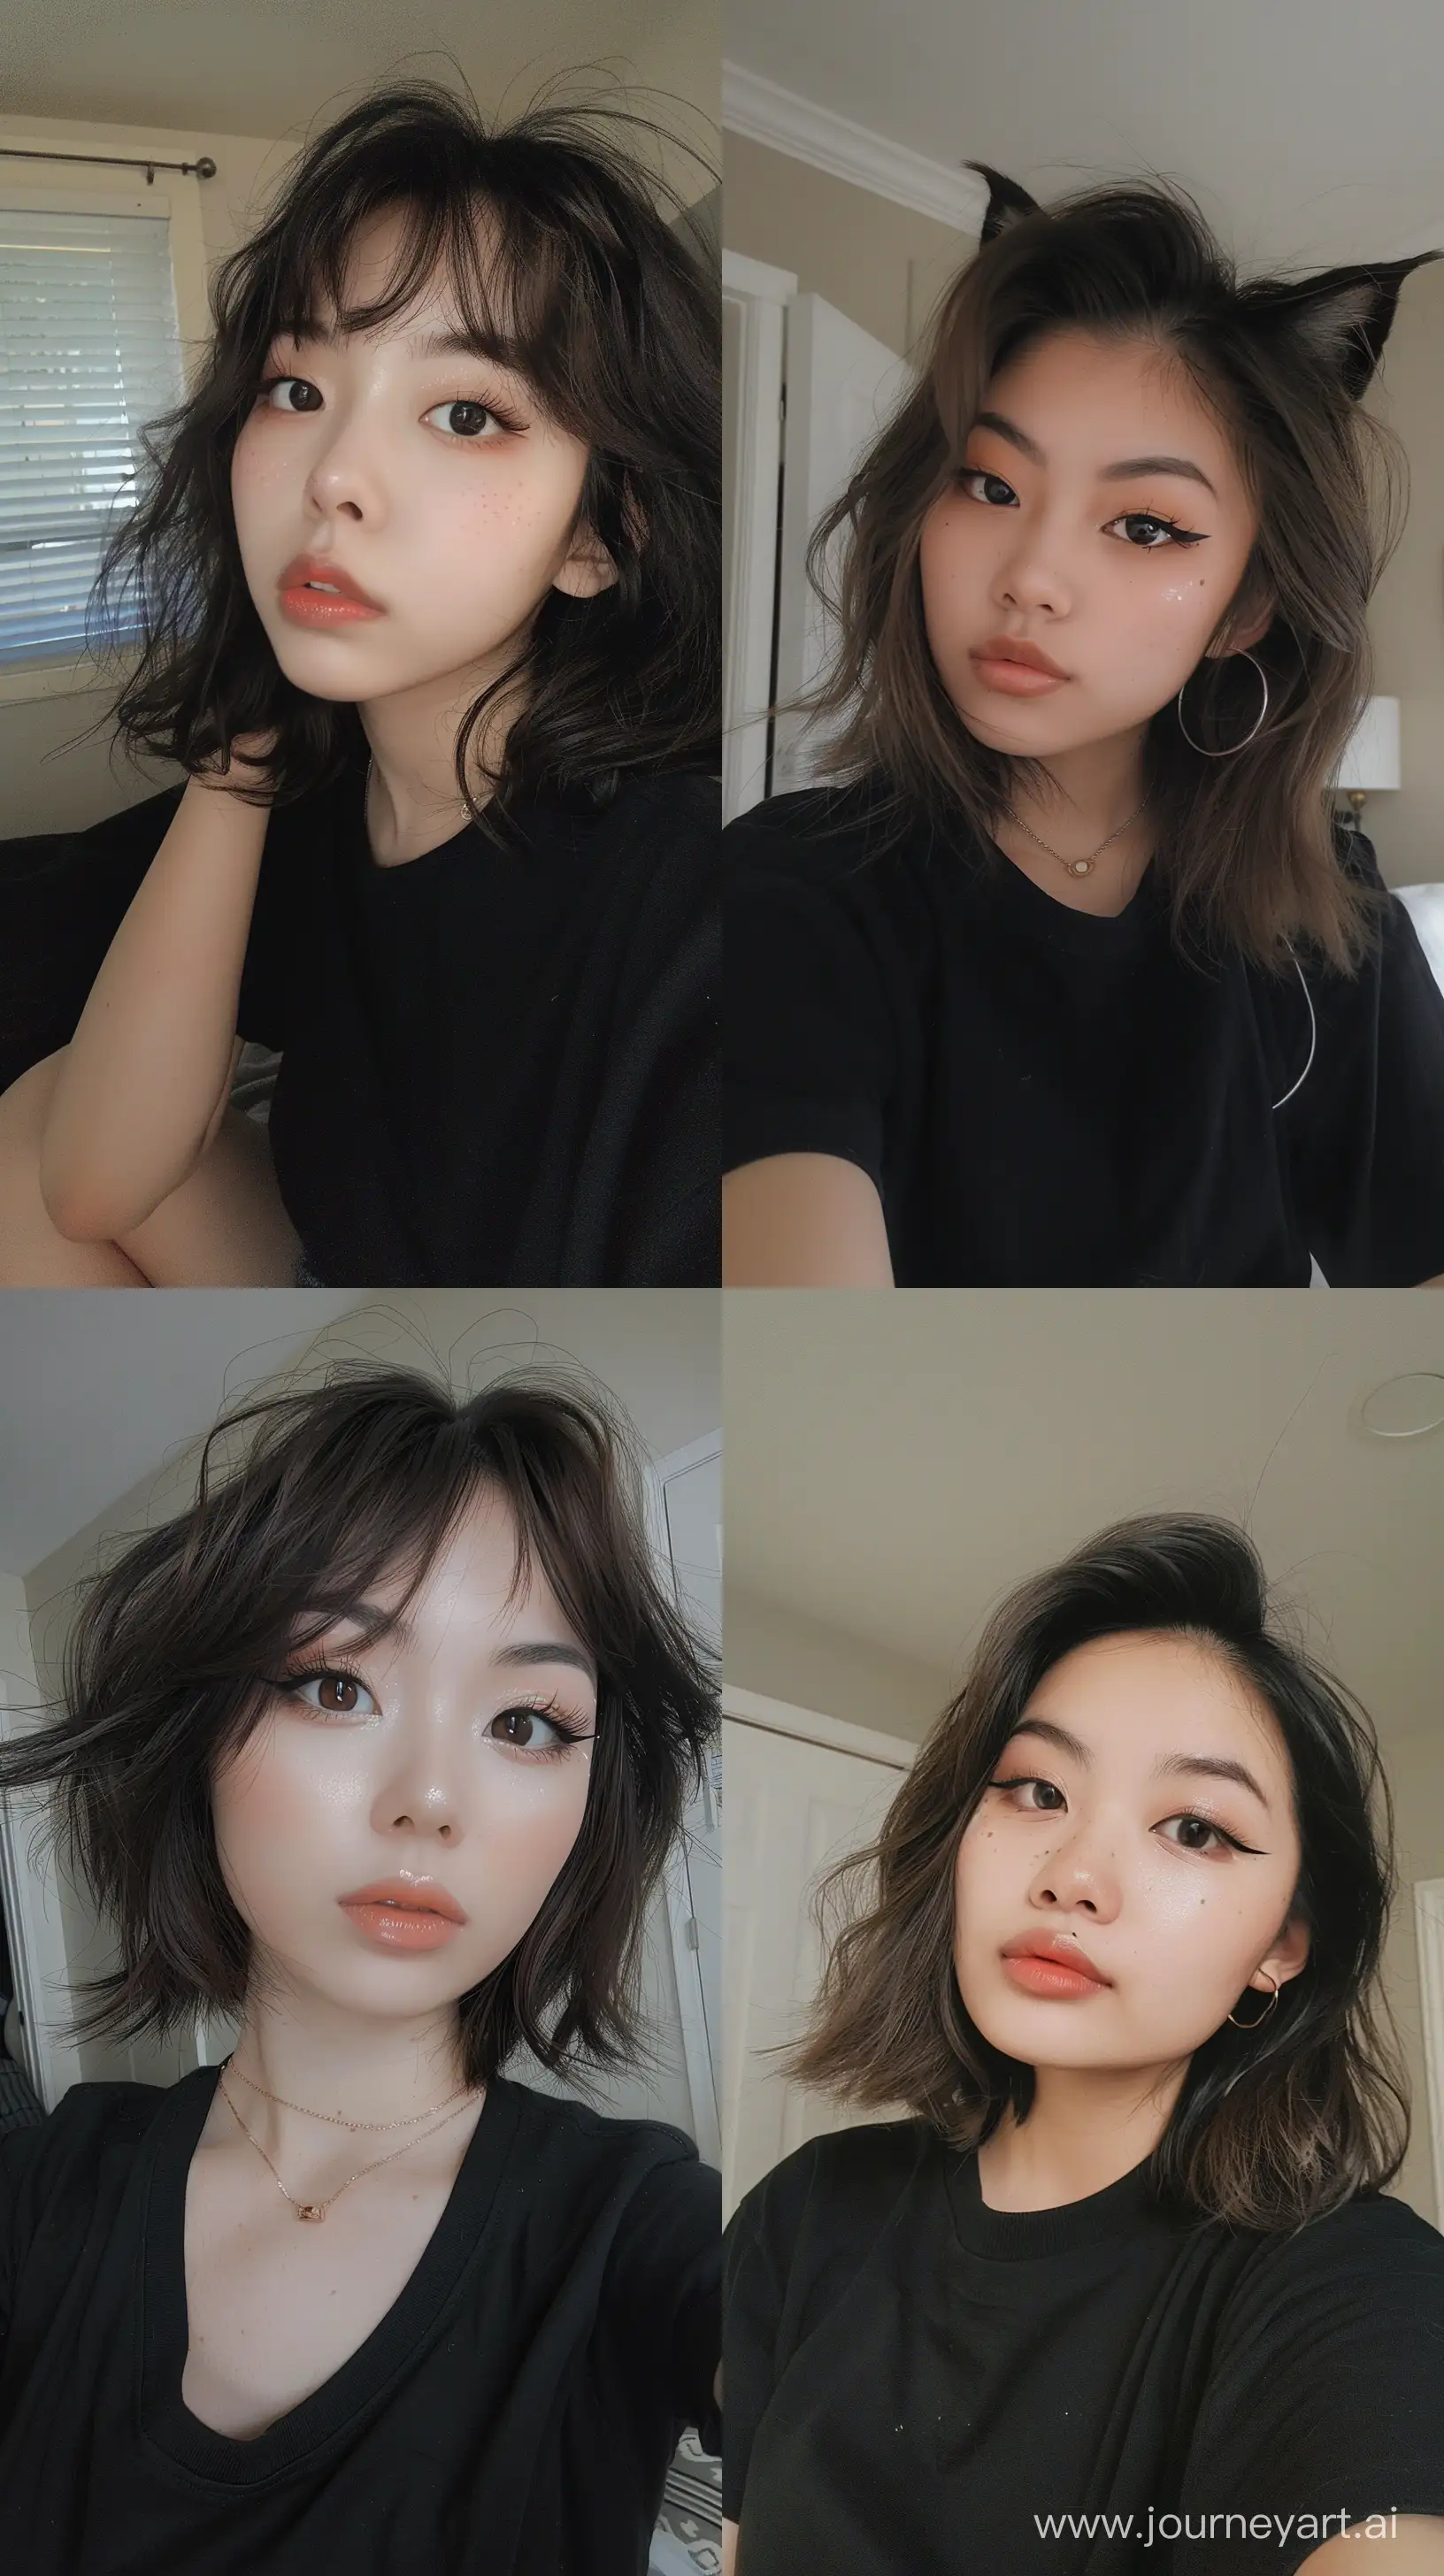 Aesthetic-Selfie-of-Asian-Girl-with-Wide-Set-Eyes-and-Wolfcut-Hair